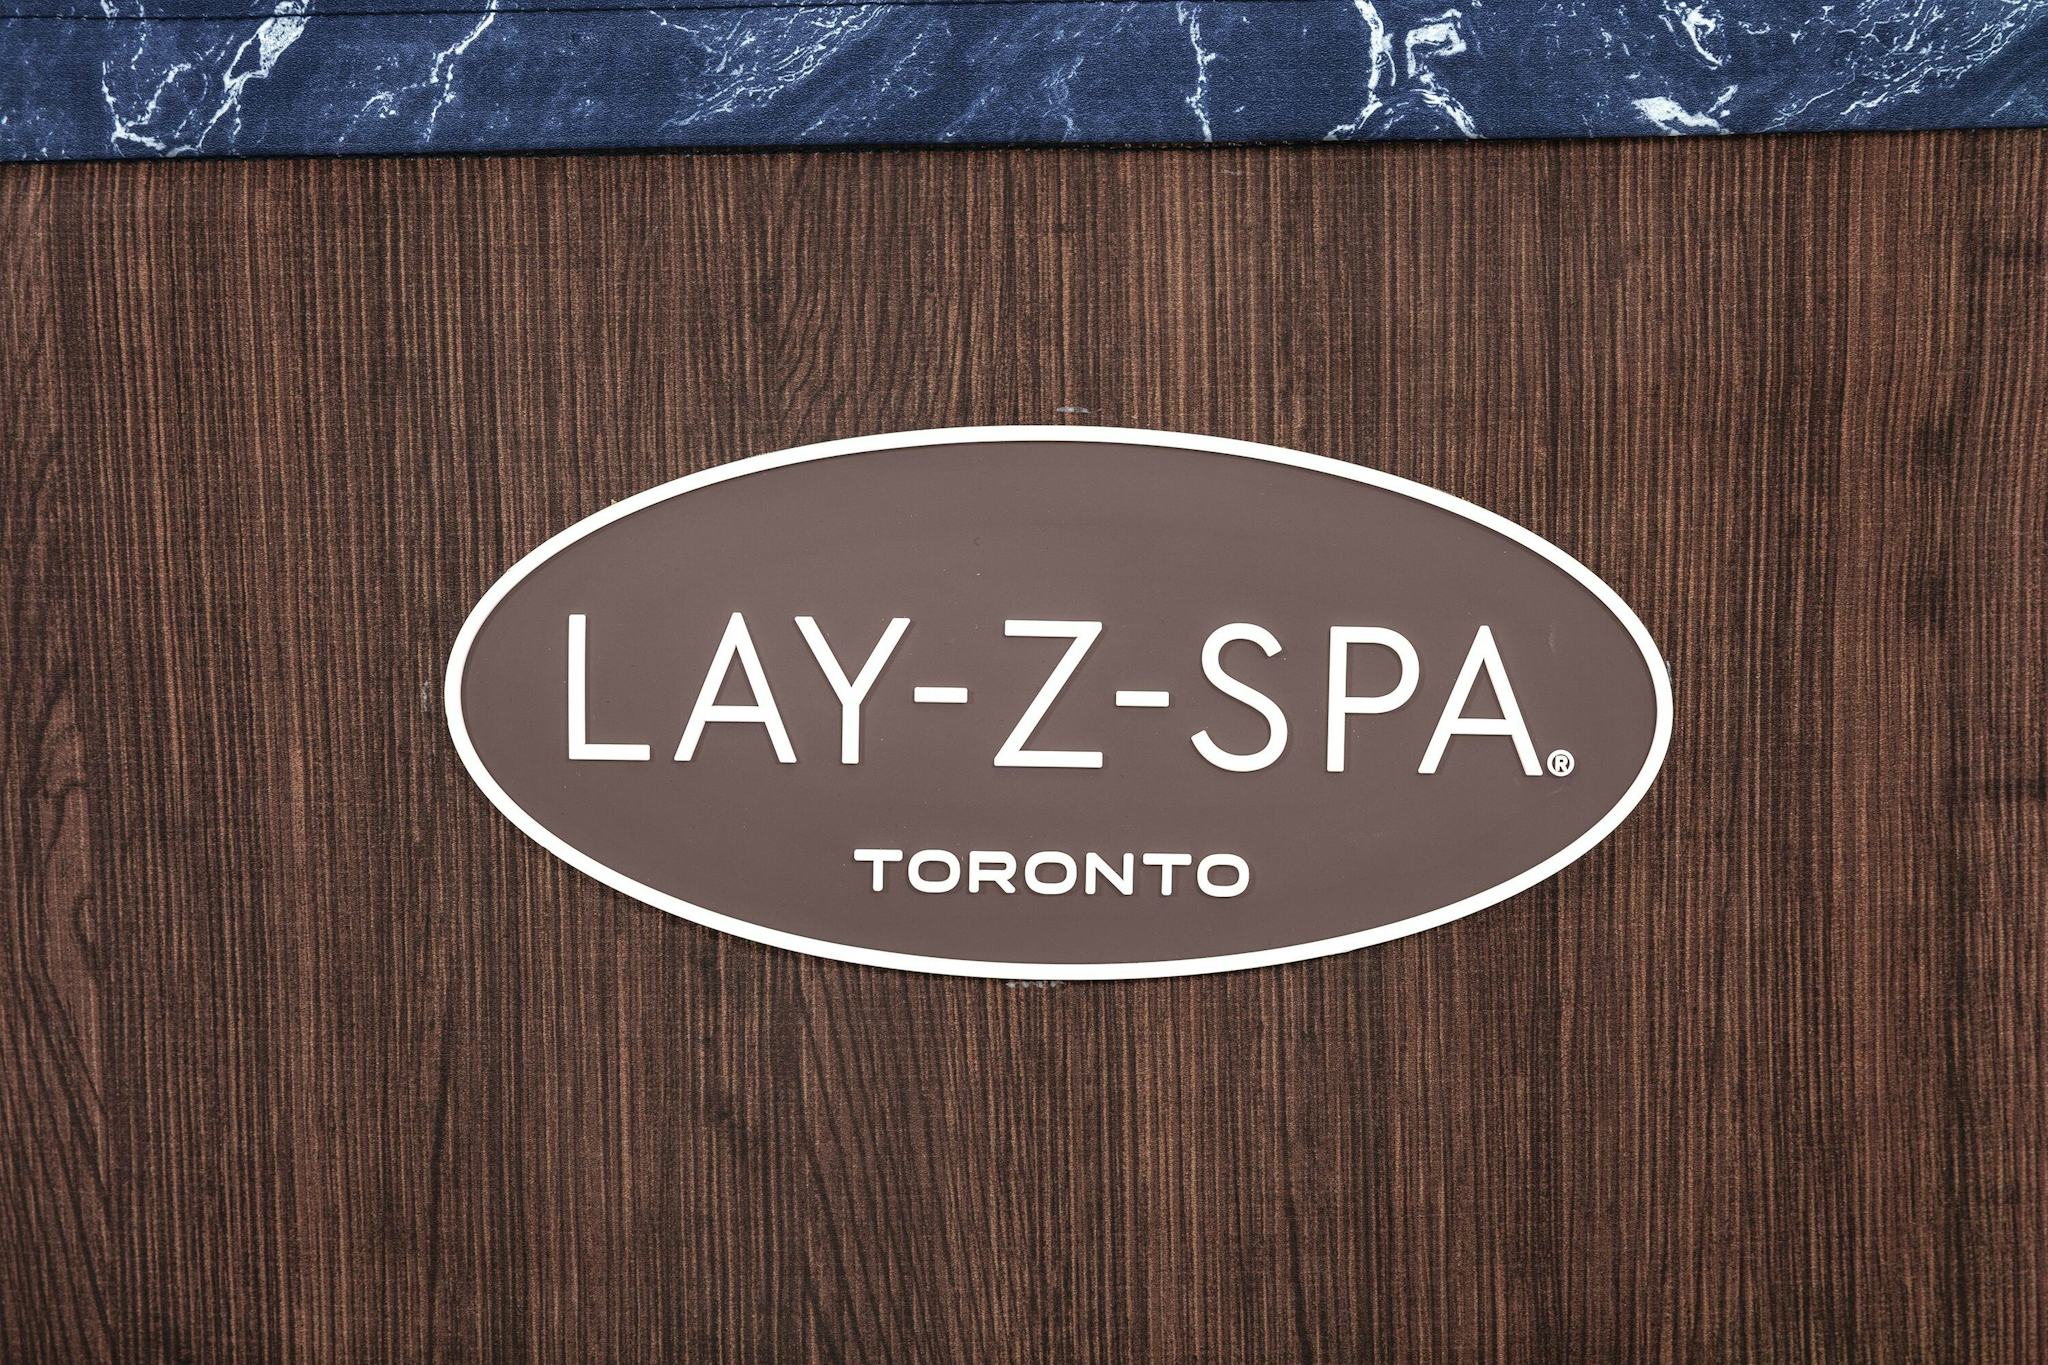 Spas Gonflables Spa semi rigide 5-7 places Lay-Z-Spa Toronto Airjet  Bestway 7